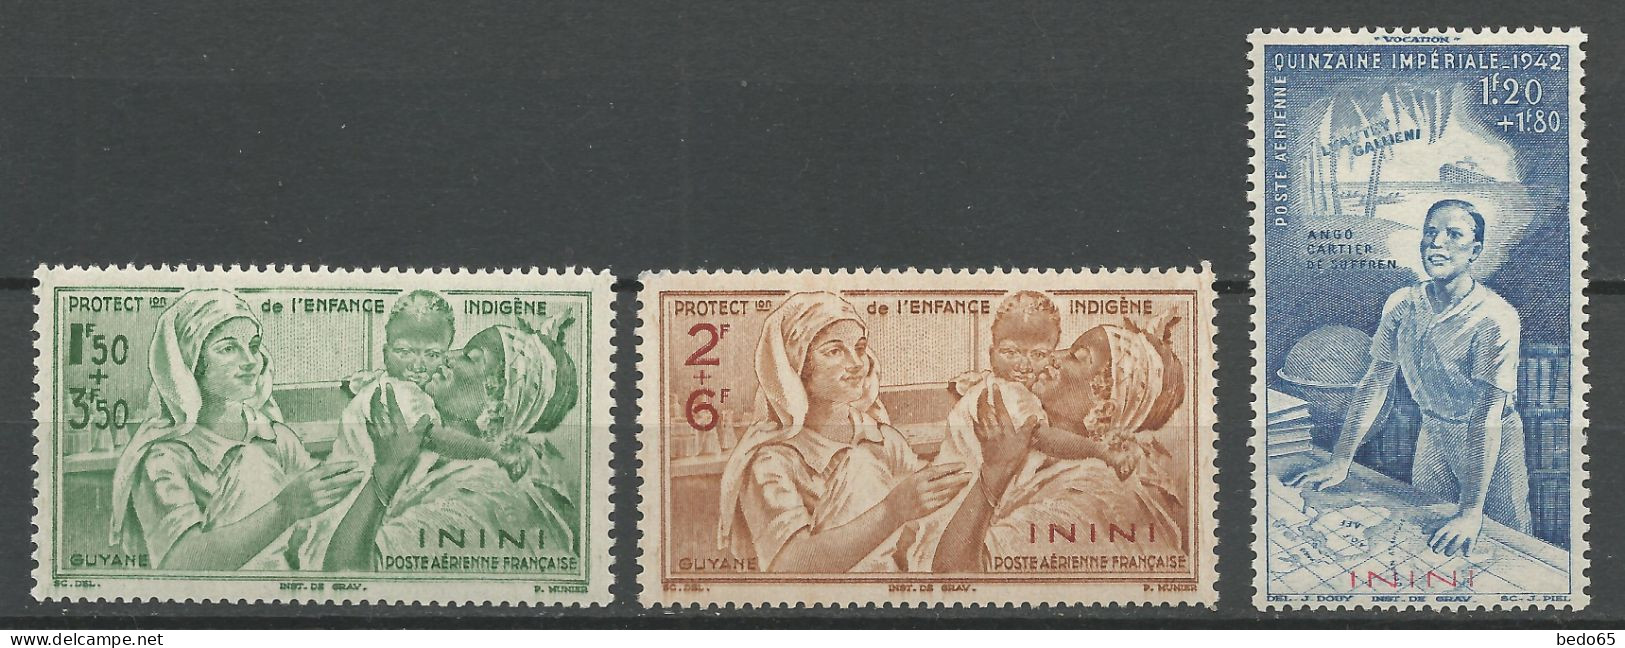 ININI PA  N° 1 à 3 NEUF** LUXE SANS CHARNIERE NI TRACE / Hingeless  / MNH - Unused Stamps